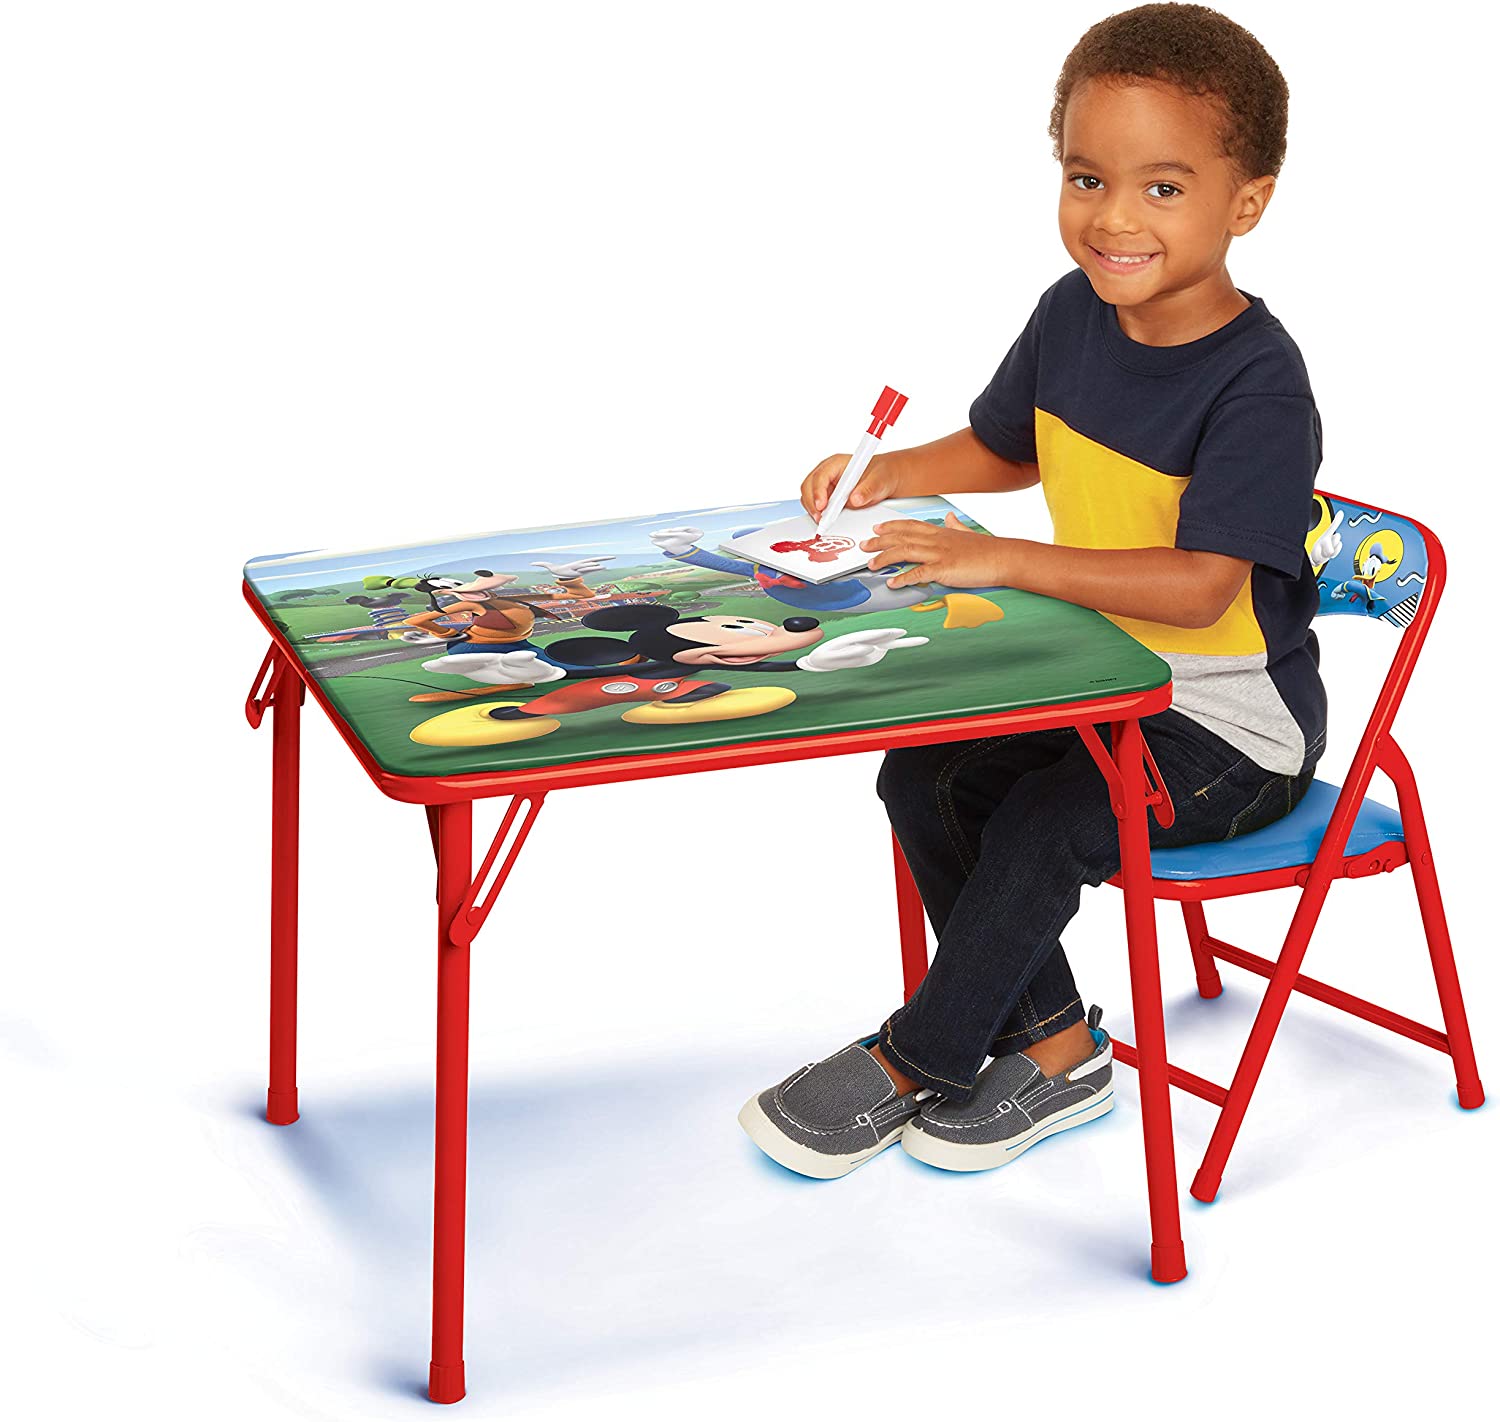 Disney Junior 45704 Mickey Kids Table & Chair Set, Junior Table for Toddlers Ages 2-5 Years ,20" x 20"